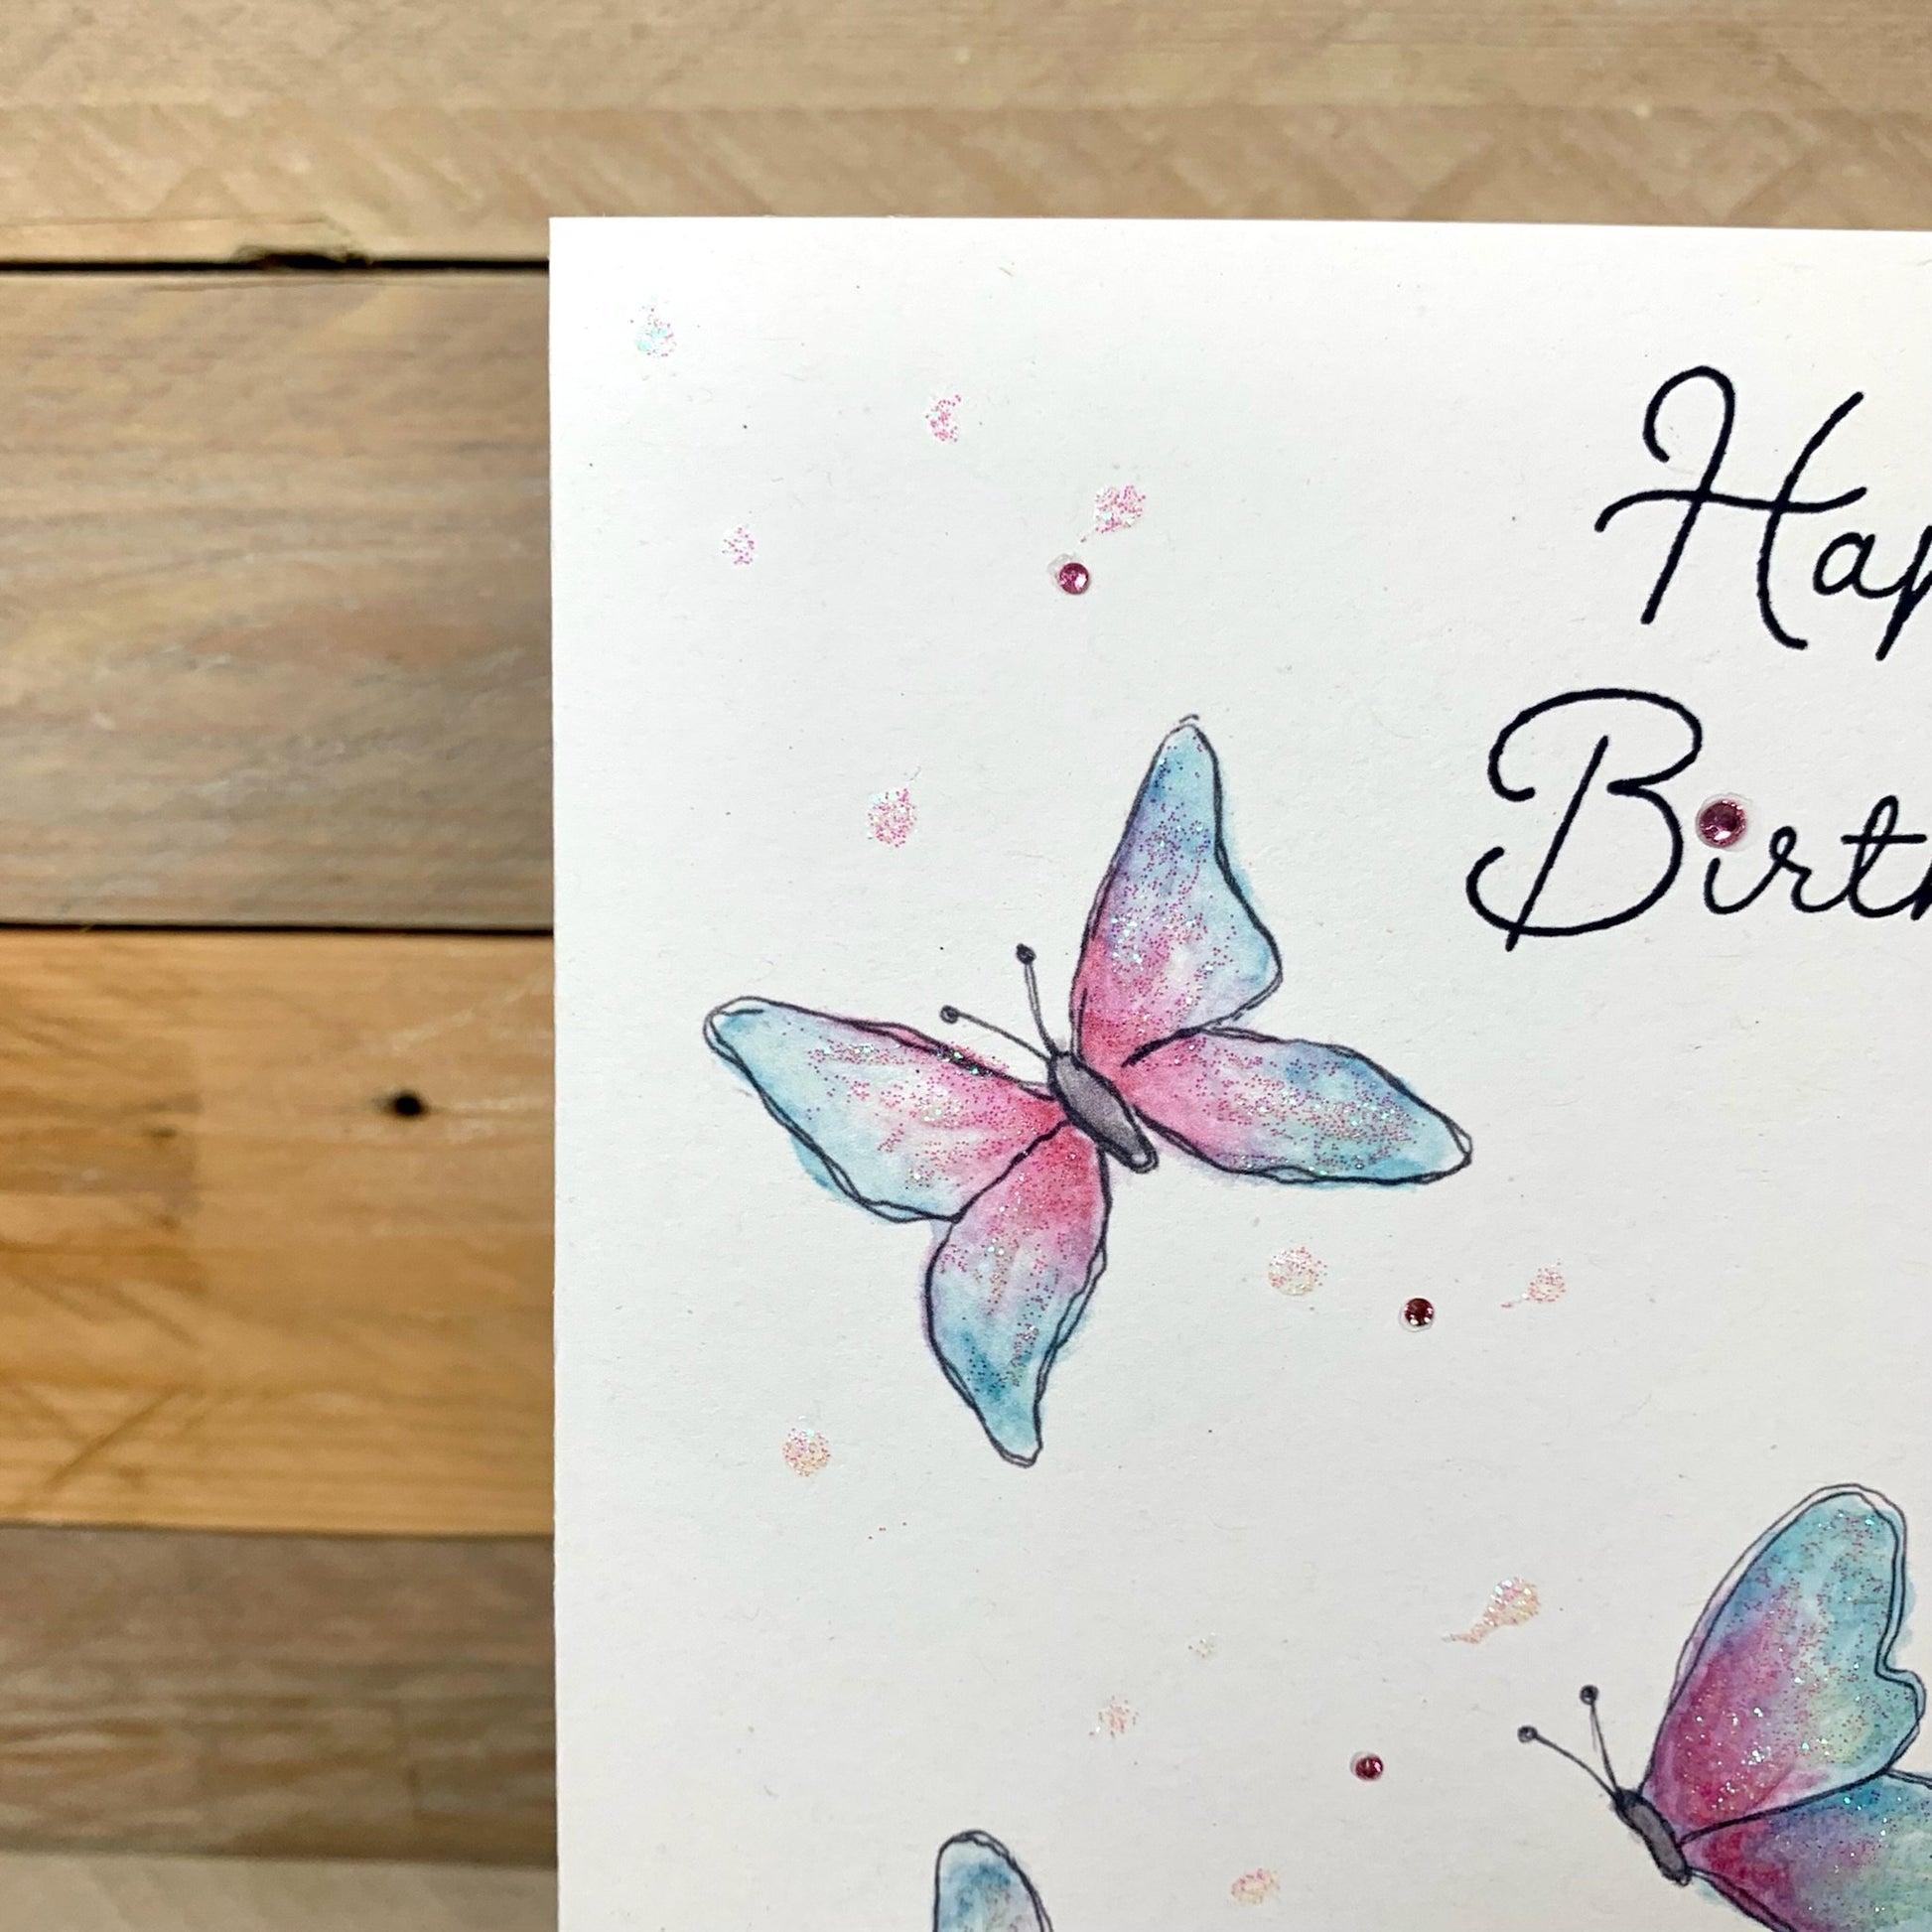 Flutterby Birthday Card - Arty Bee Designs 